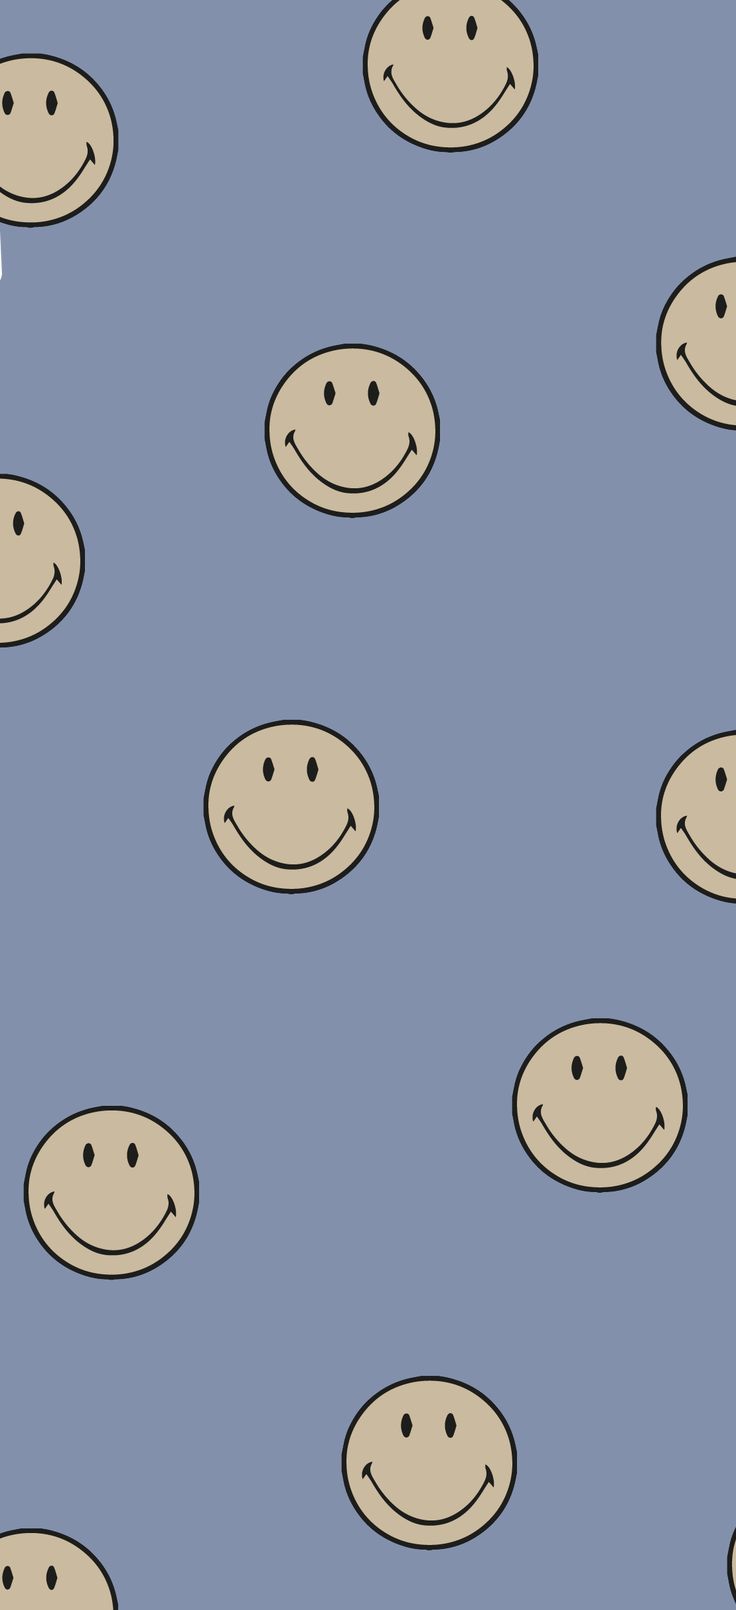 smiley face aesthetic wallpaper. Hipster wallpaper, Cute patterns wallpaper, Cute simple wallpaper